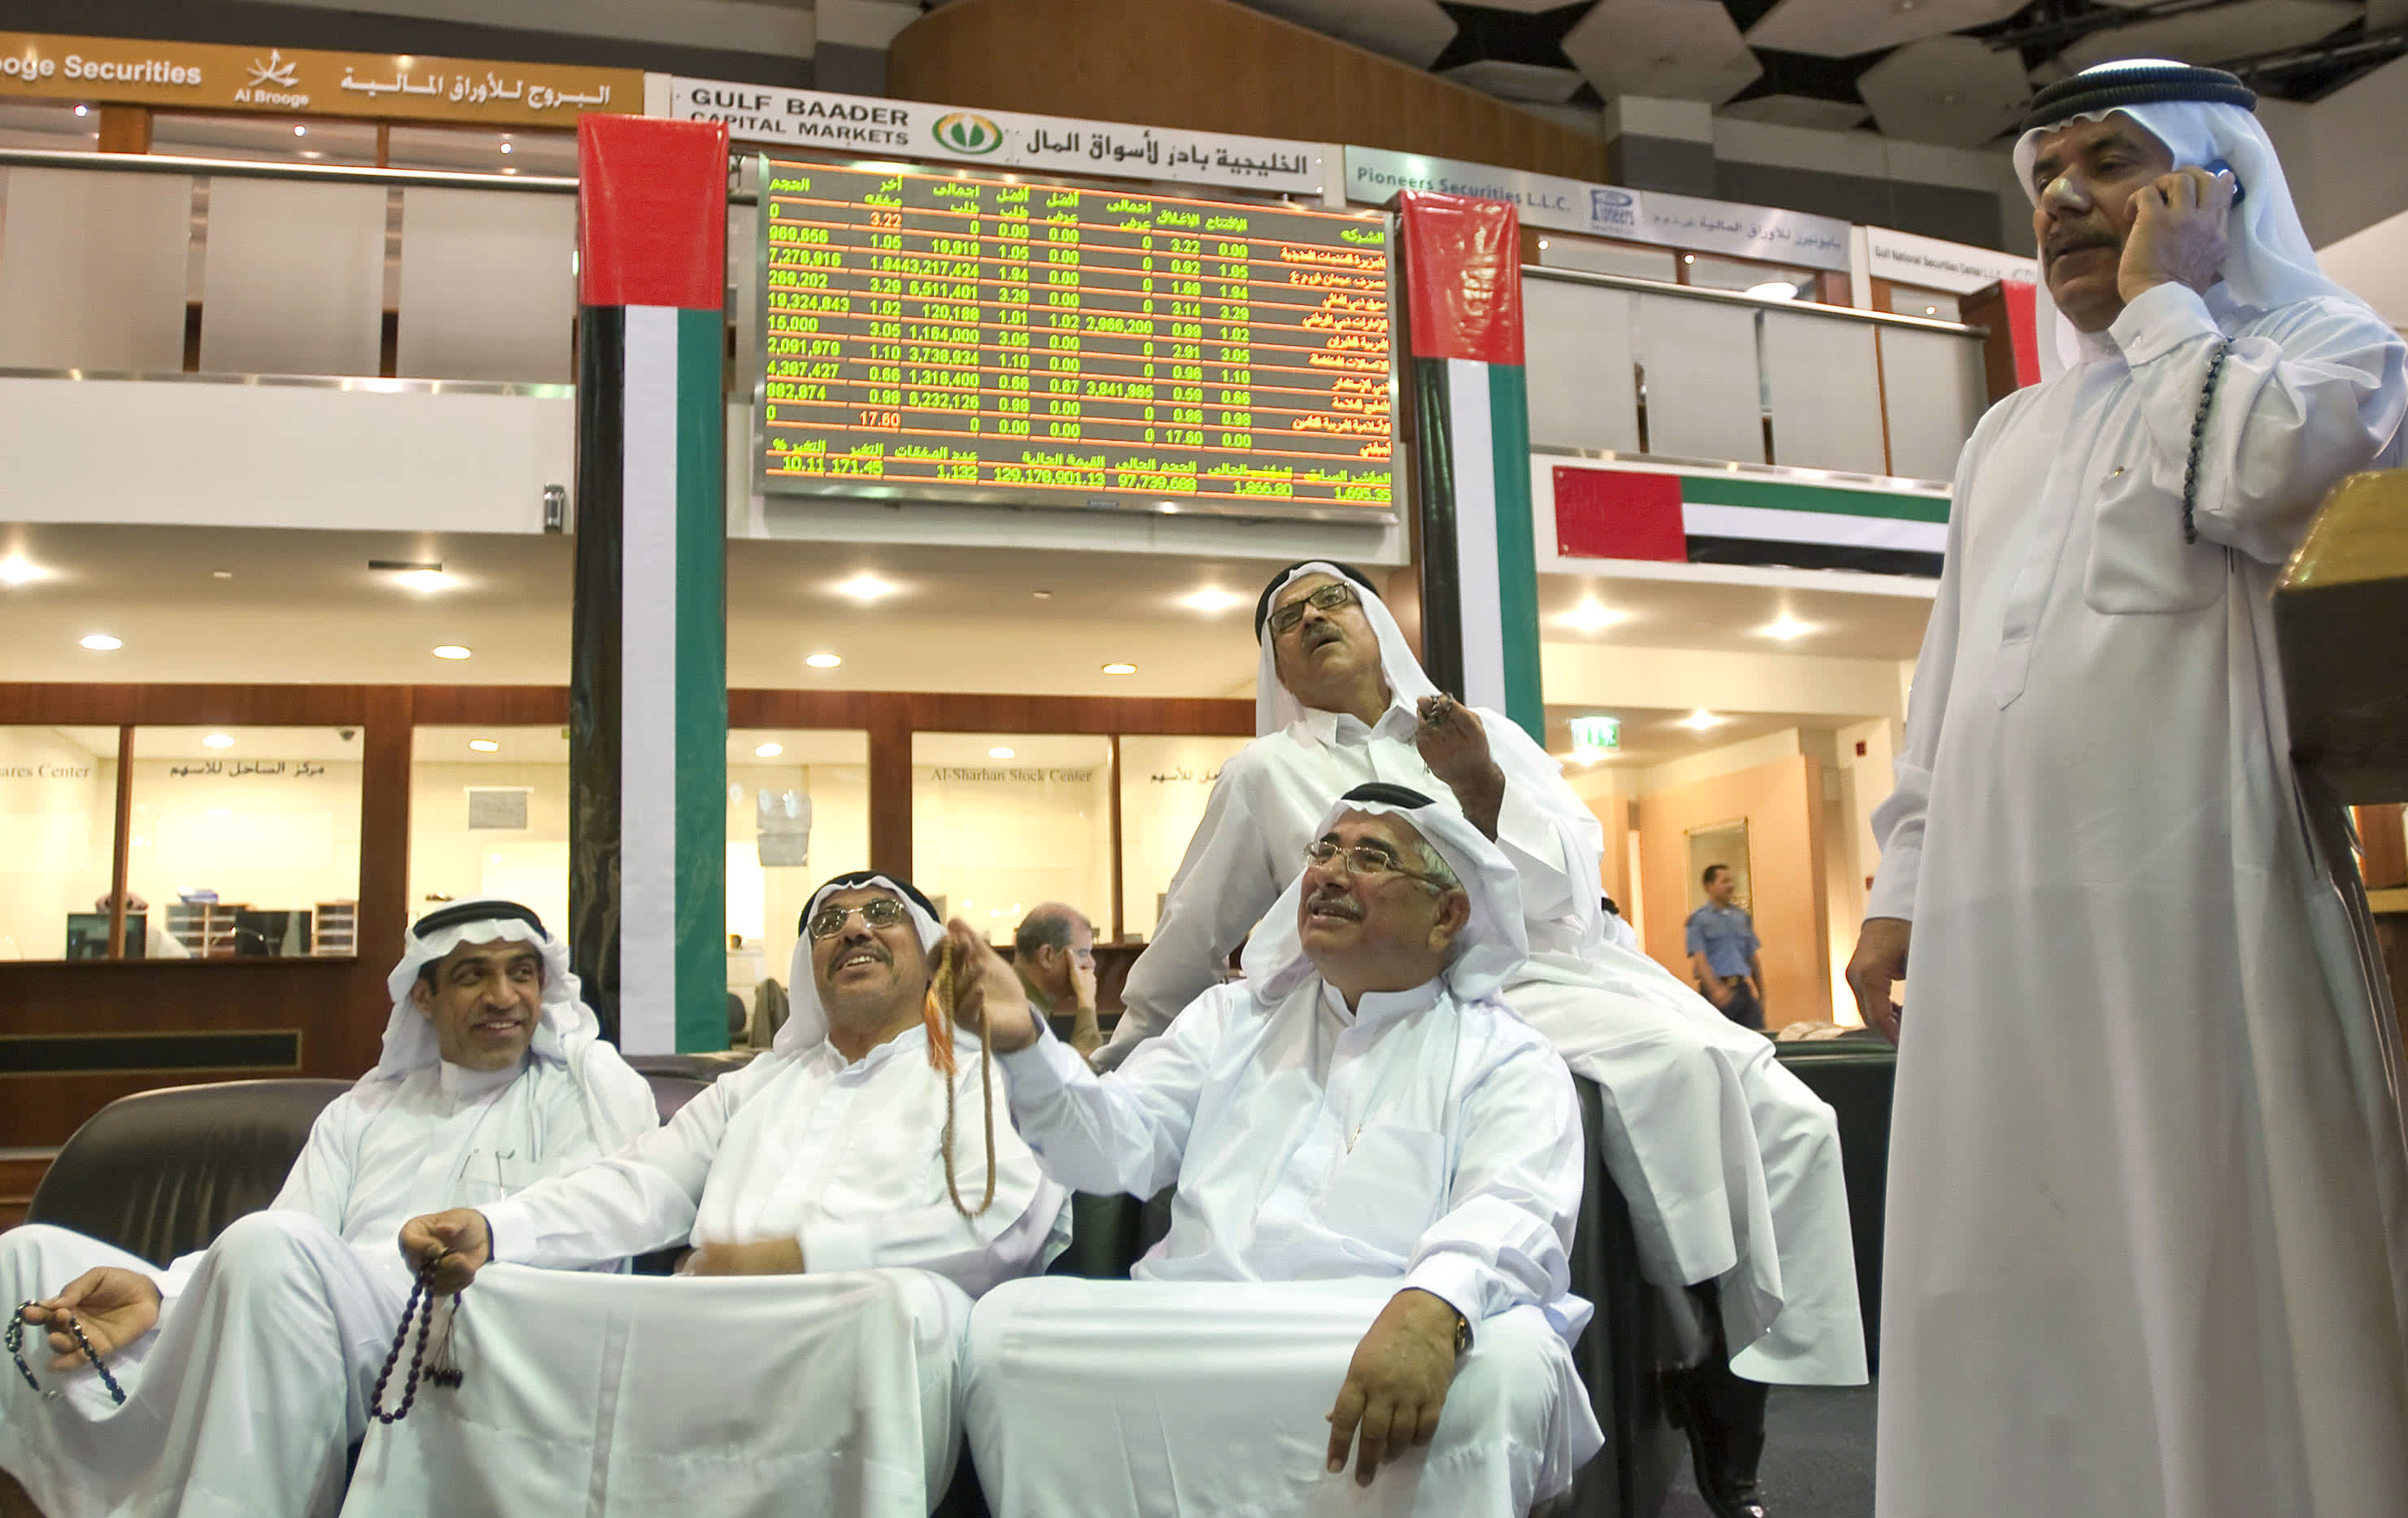 Dubai, Abu Dhabi exchanges could merge by year-end